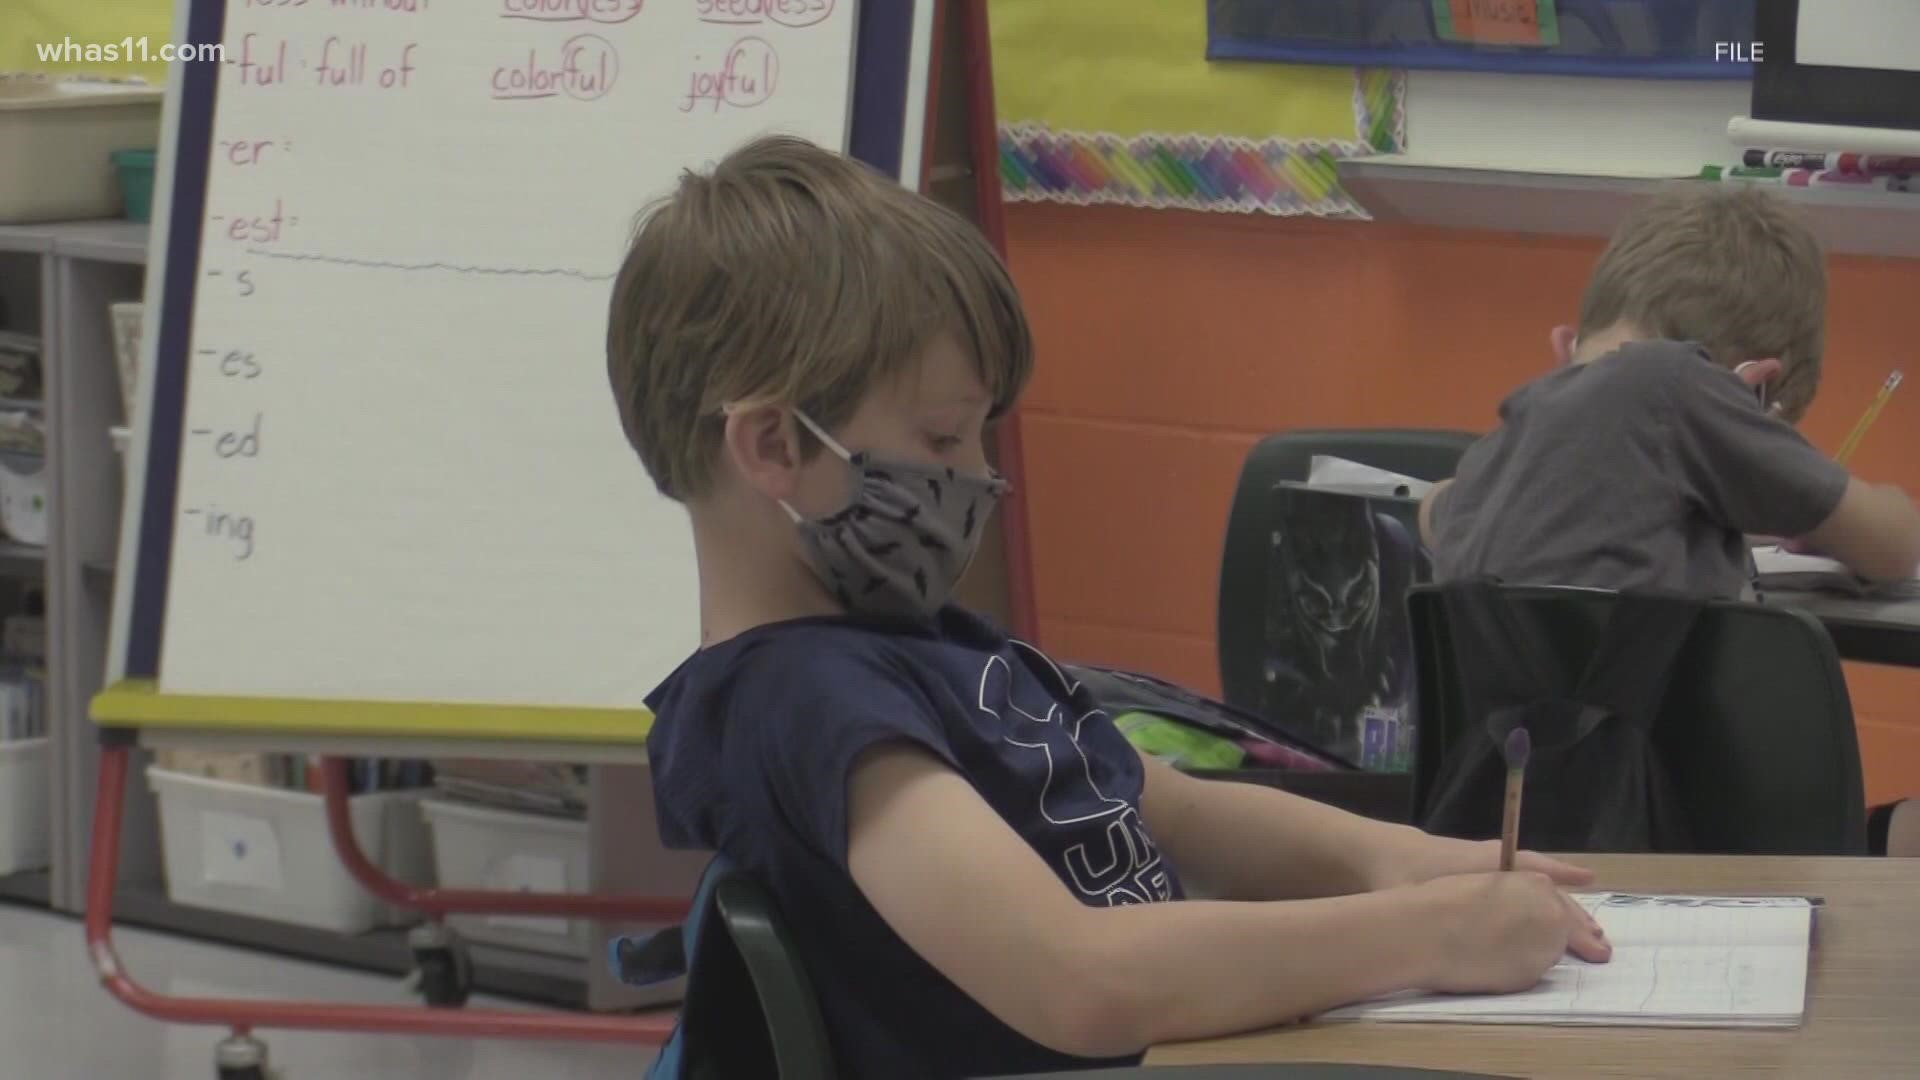 The 2021-22 school year is quickly approaching. Here's where some local districts stand on requiring masks at school.